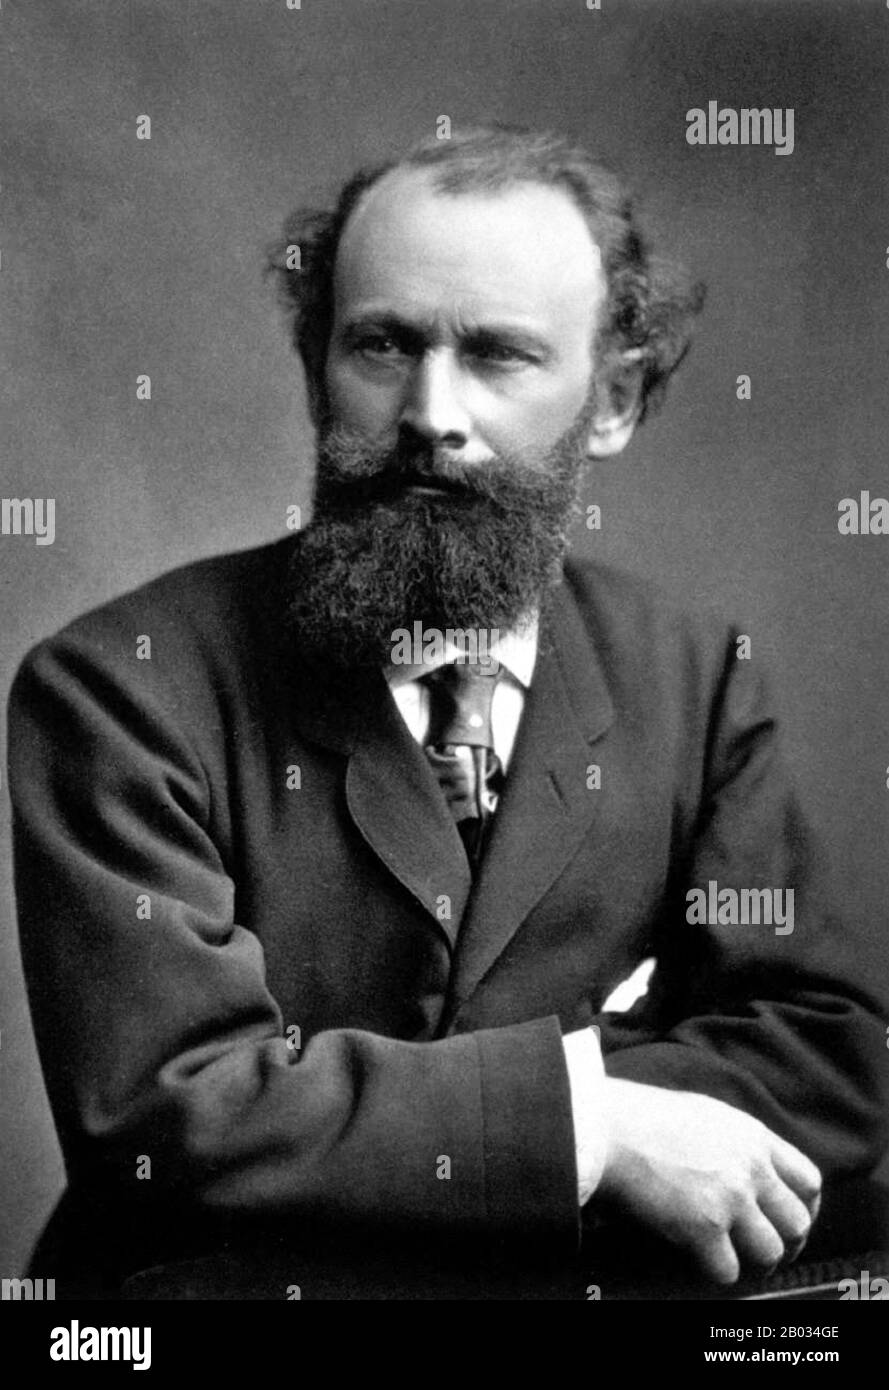 Edouard Manet (23 January 1832 – 30 April 1883) was a French painter. He was one of the first 19th-century artists to paint modern life, and a pivotal figure in the transition from Realism to Impressionism. Stock Photo